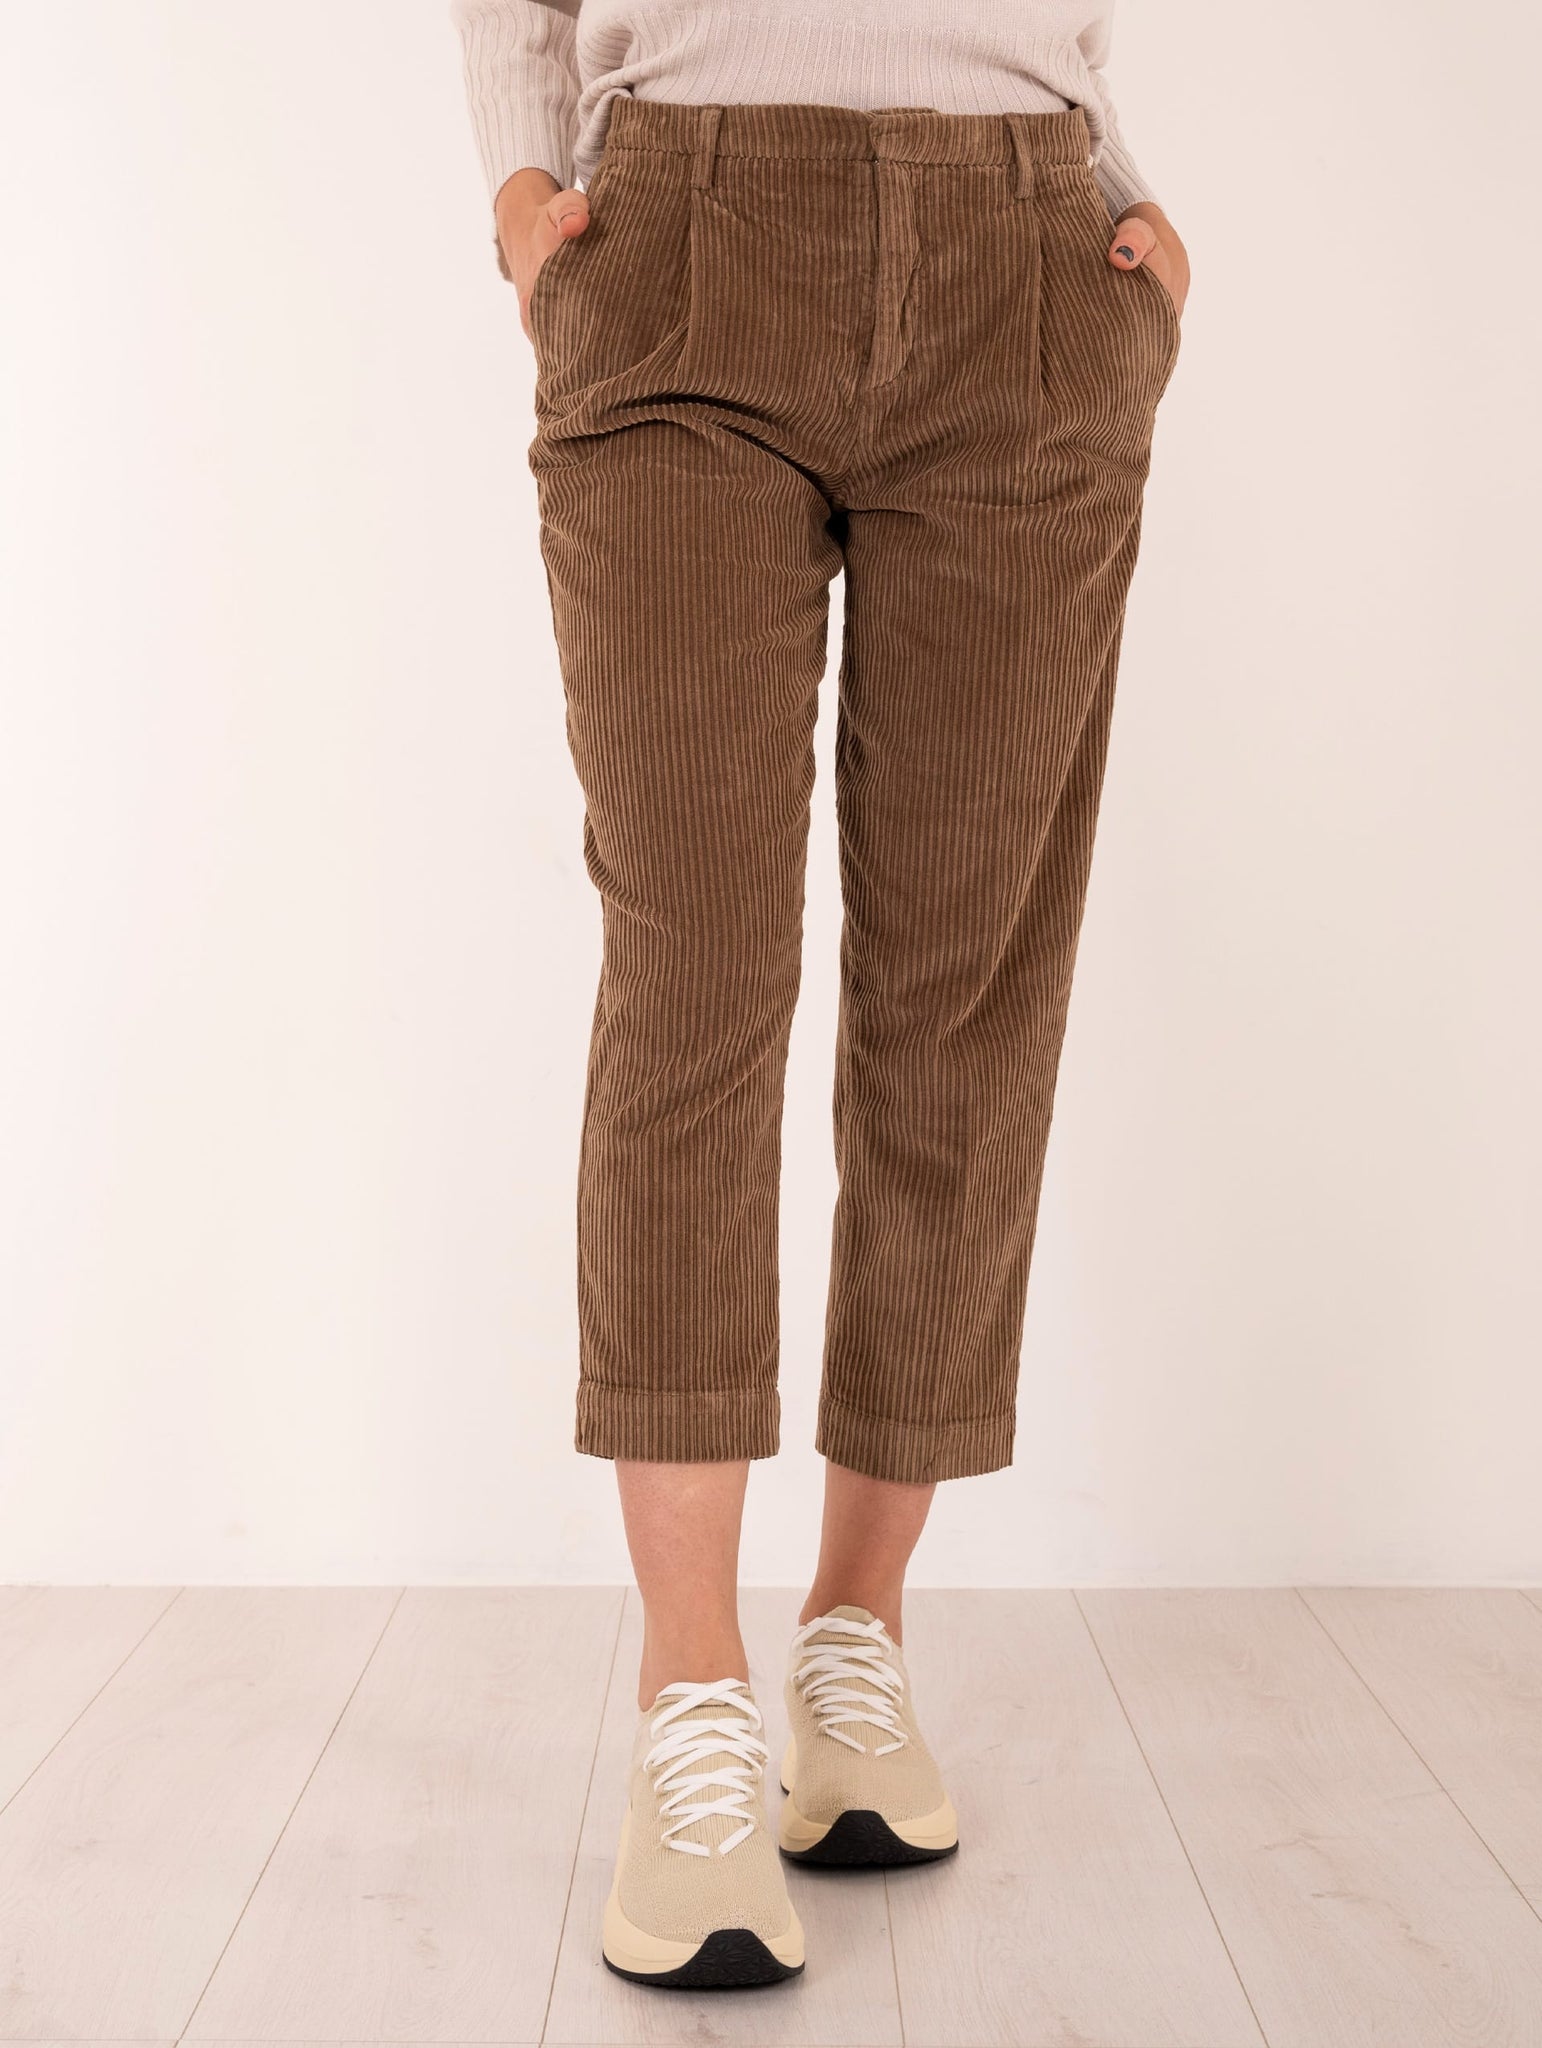 Pantalone Roy Roger's Chino in Velluto a Coste Biscotto